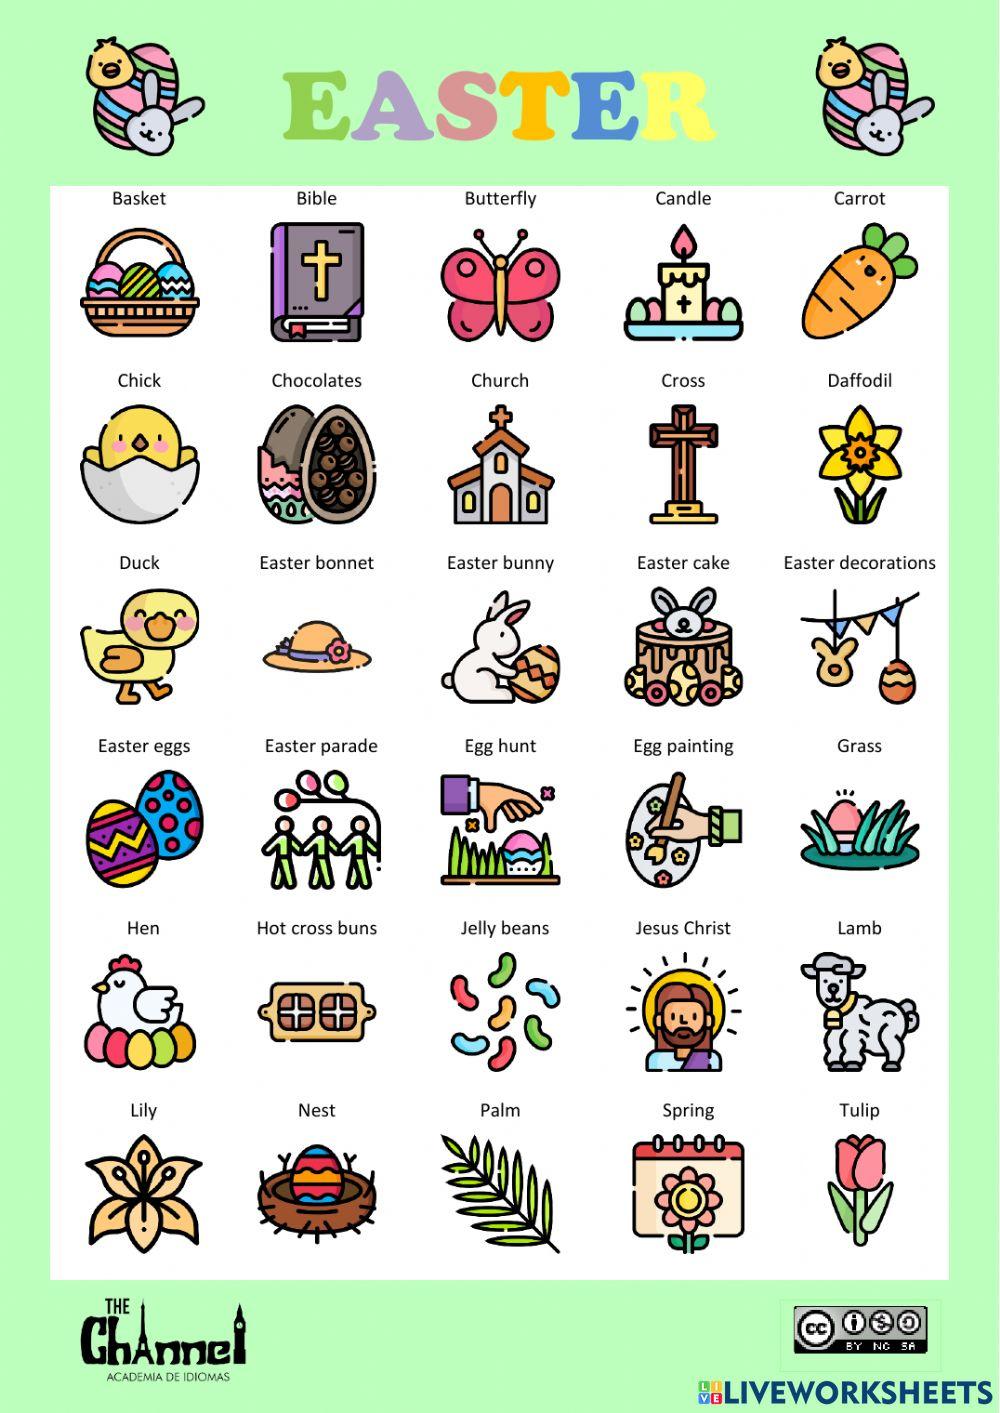 EASTER - Vocabulary (30 words)